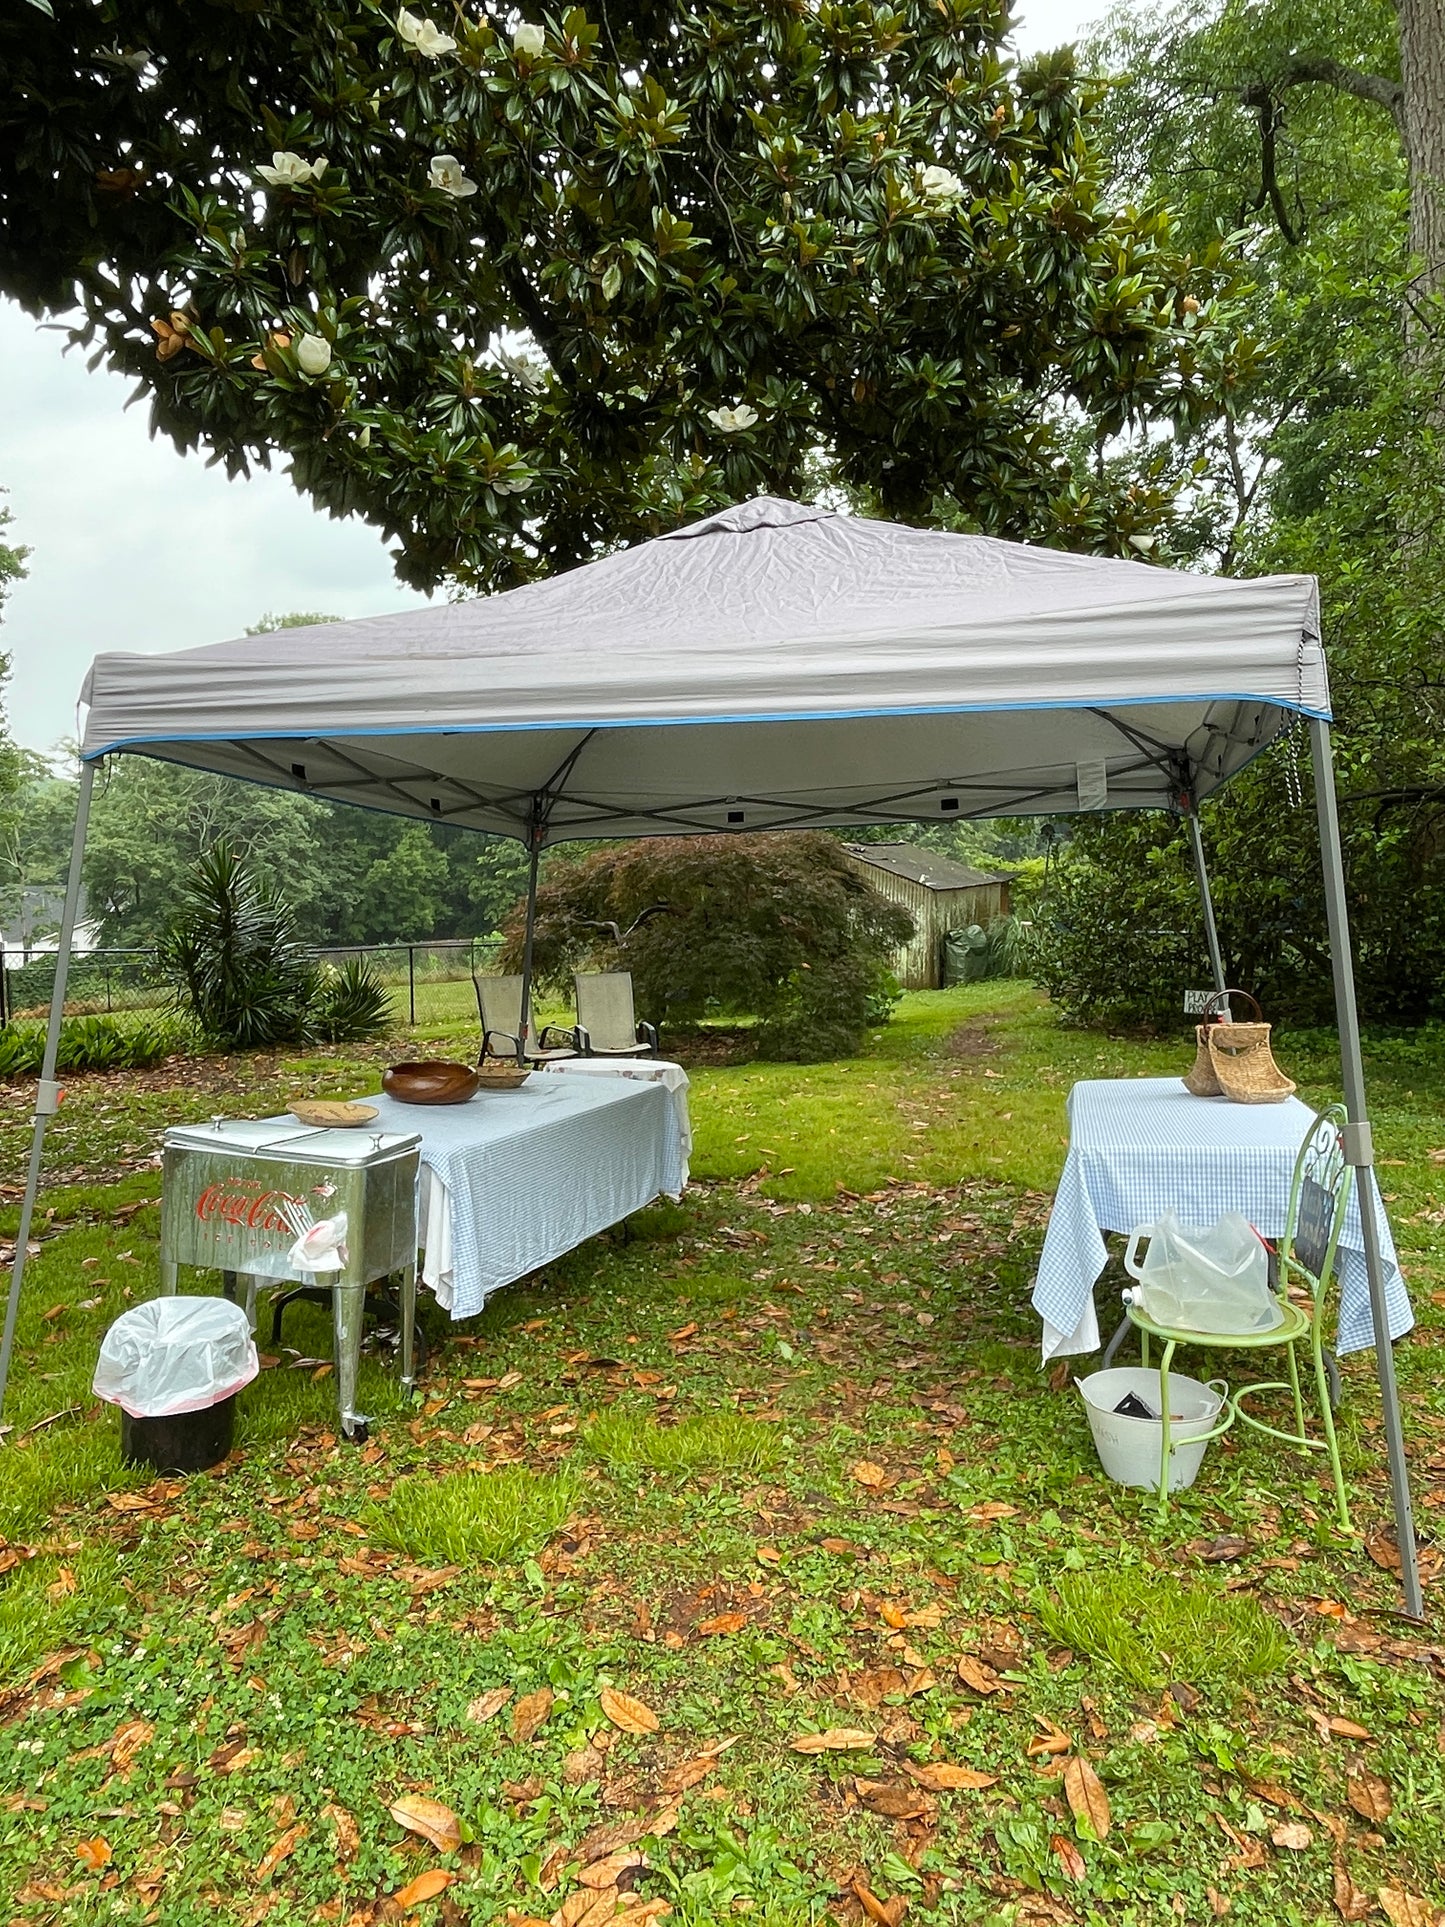 Tables and table cloths can be provided. A standing cooler for ice and drinks can easily be provided. A canopy can be provided should there be inclement weather. We are happy to set up a hand washing station but feel free to bring wipes, paper towels, or hand sanitizer.